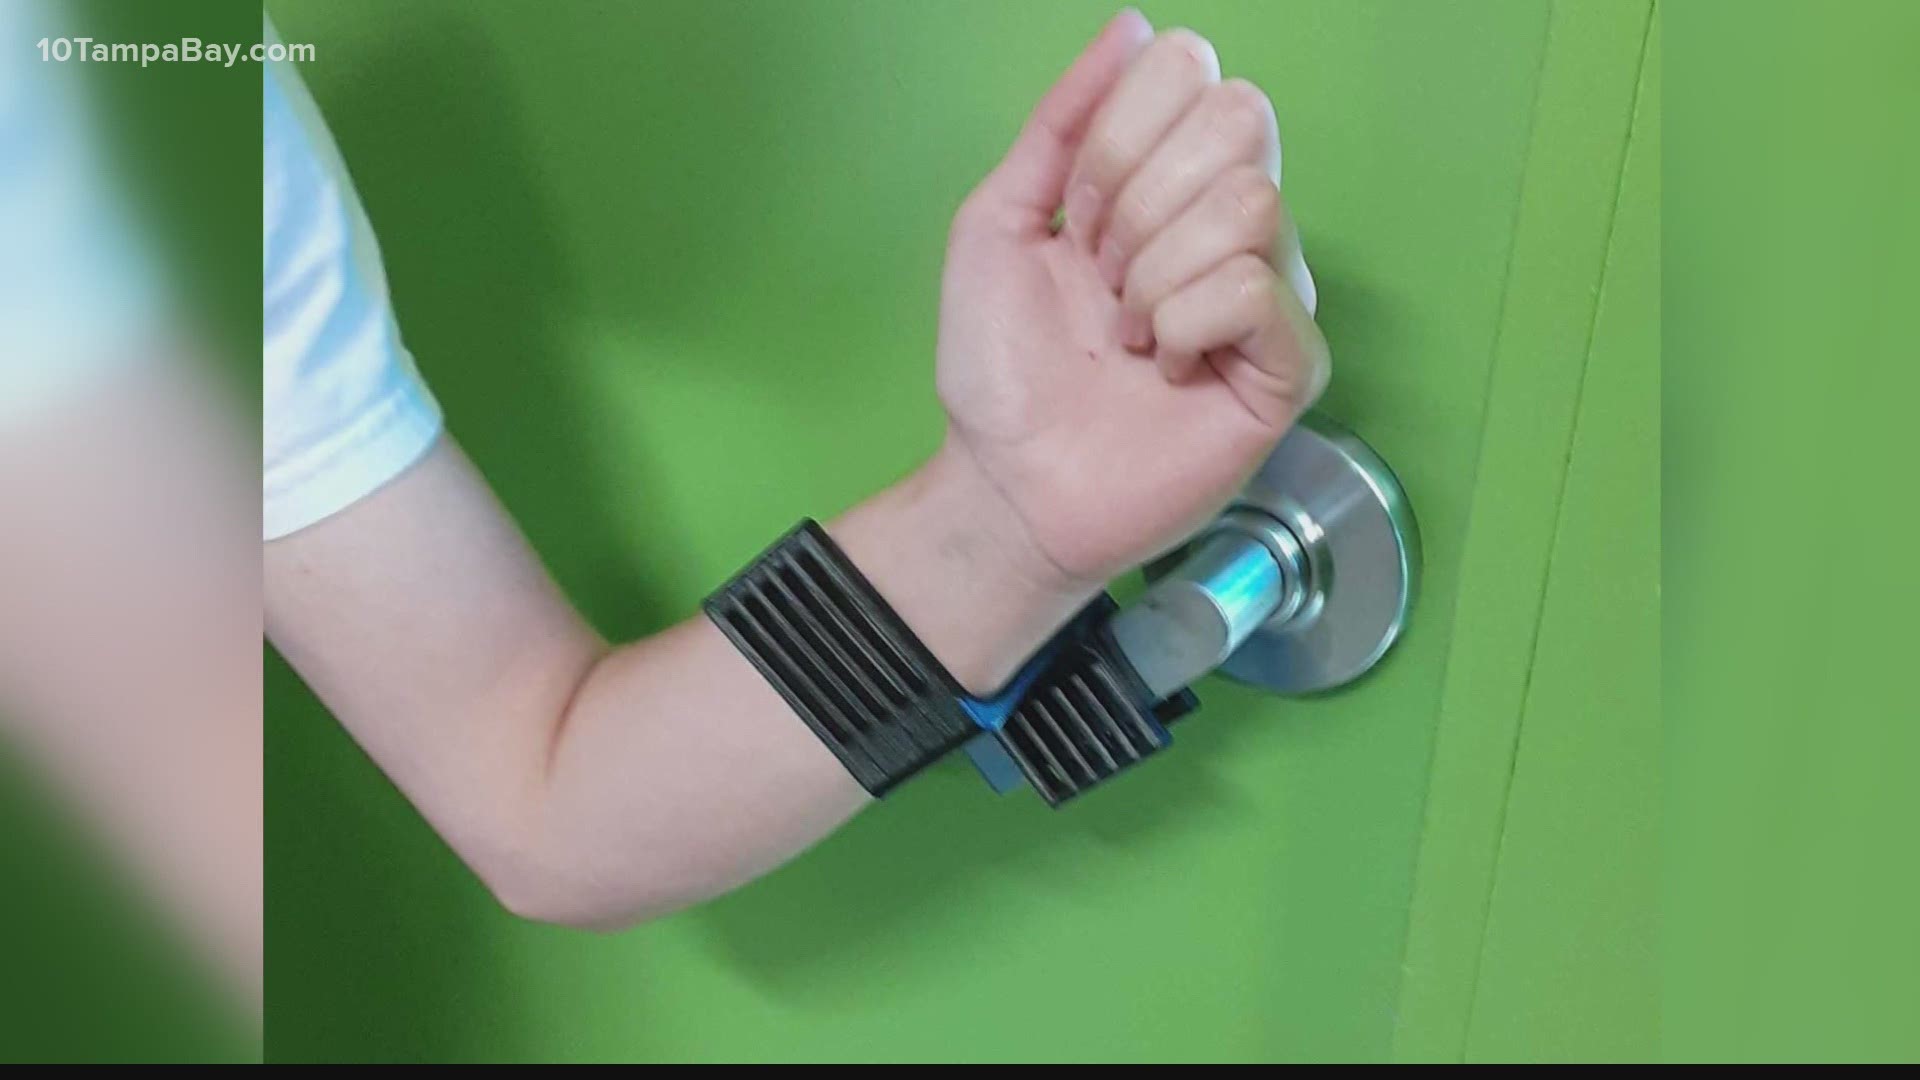 A student-led project is trying to take the germs out of door handles.